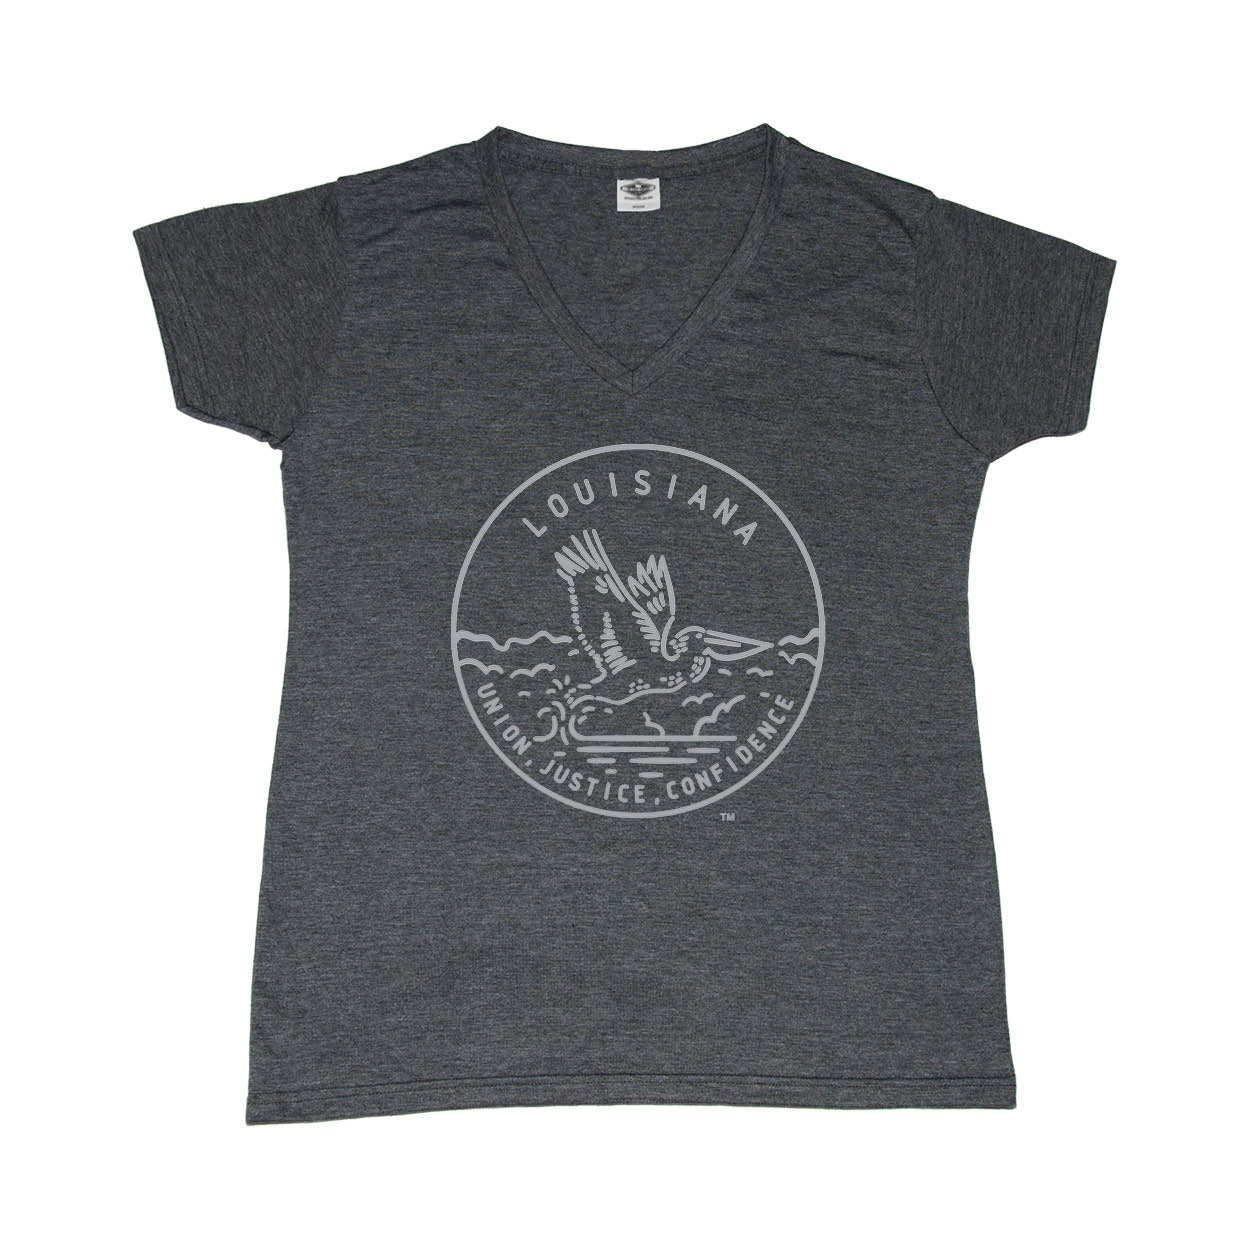 LOUISIANA LADIES' V-NECK | STATE SEAL | UNION, JUSTICE, CONFIDENCE